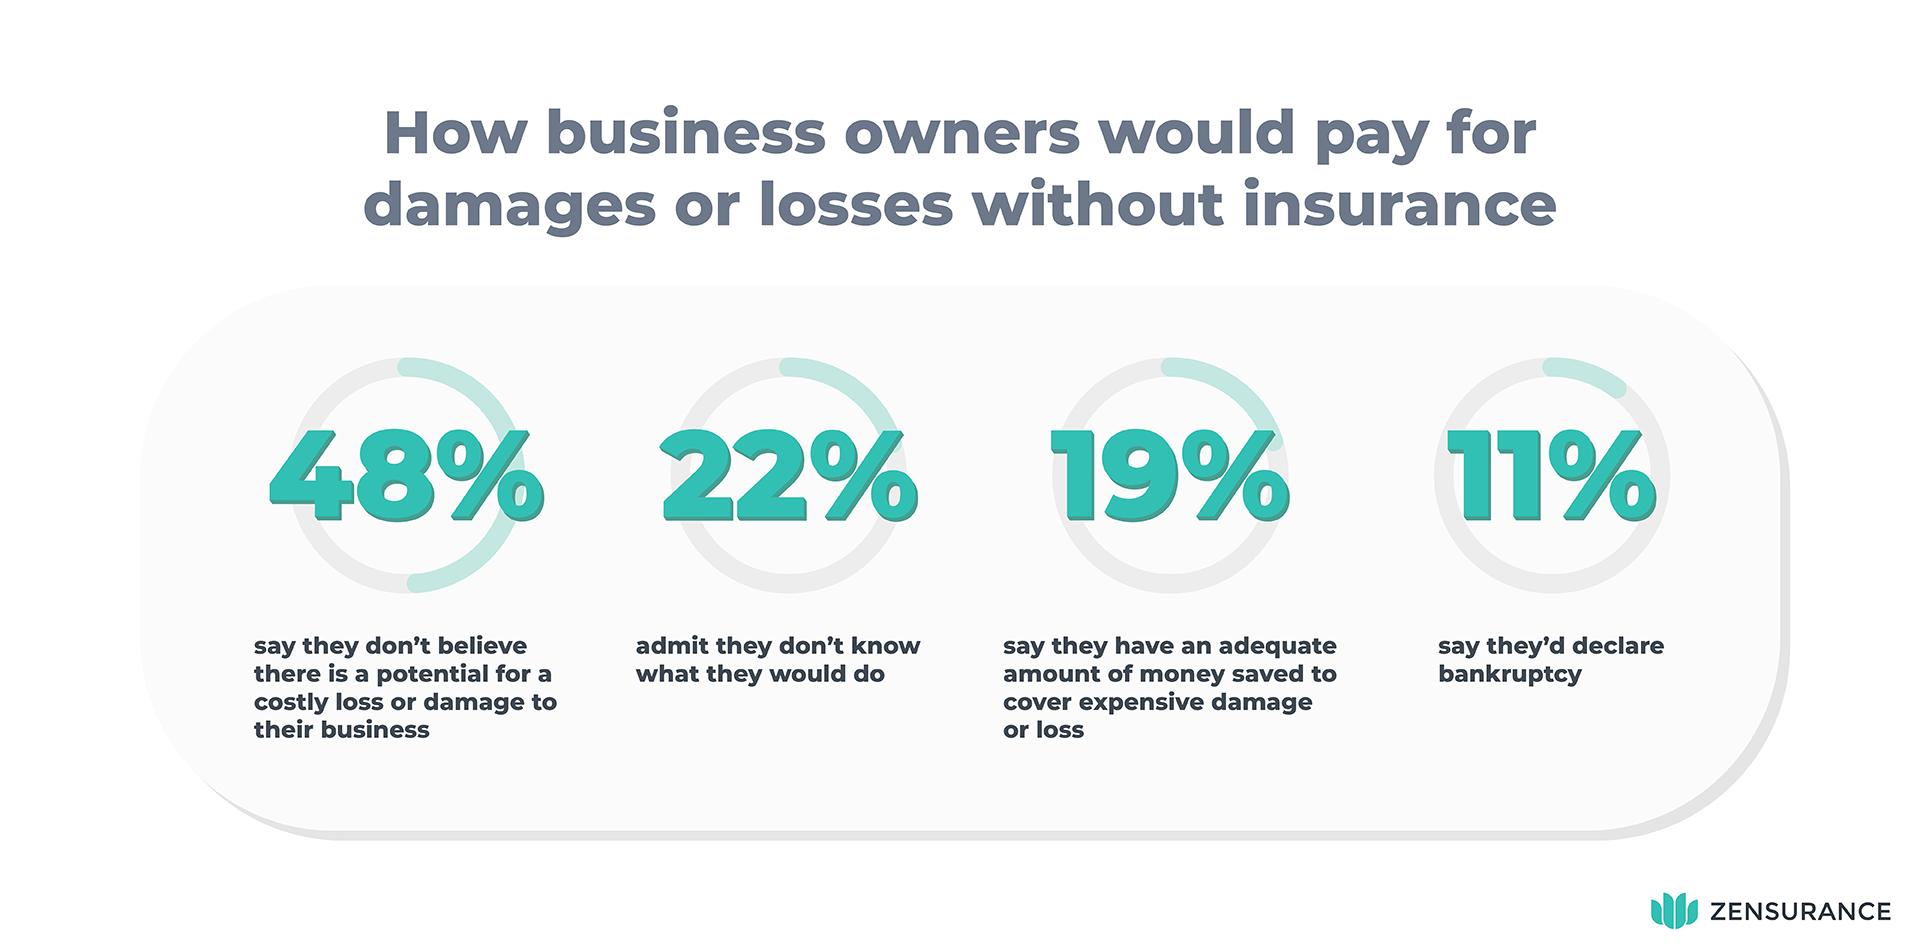 How business owners would pay for damages or losses without insurance